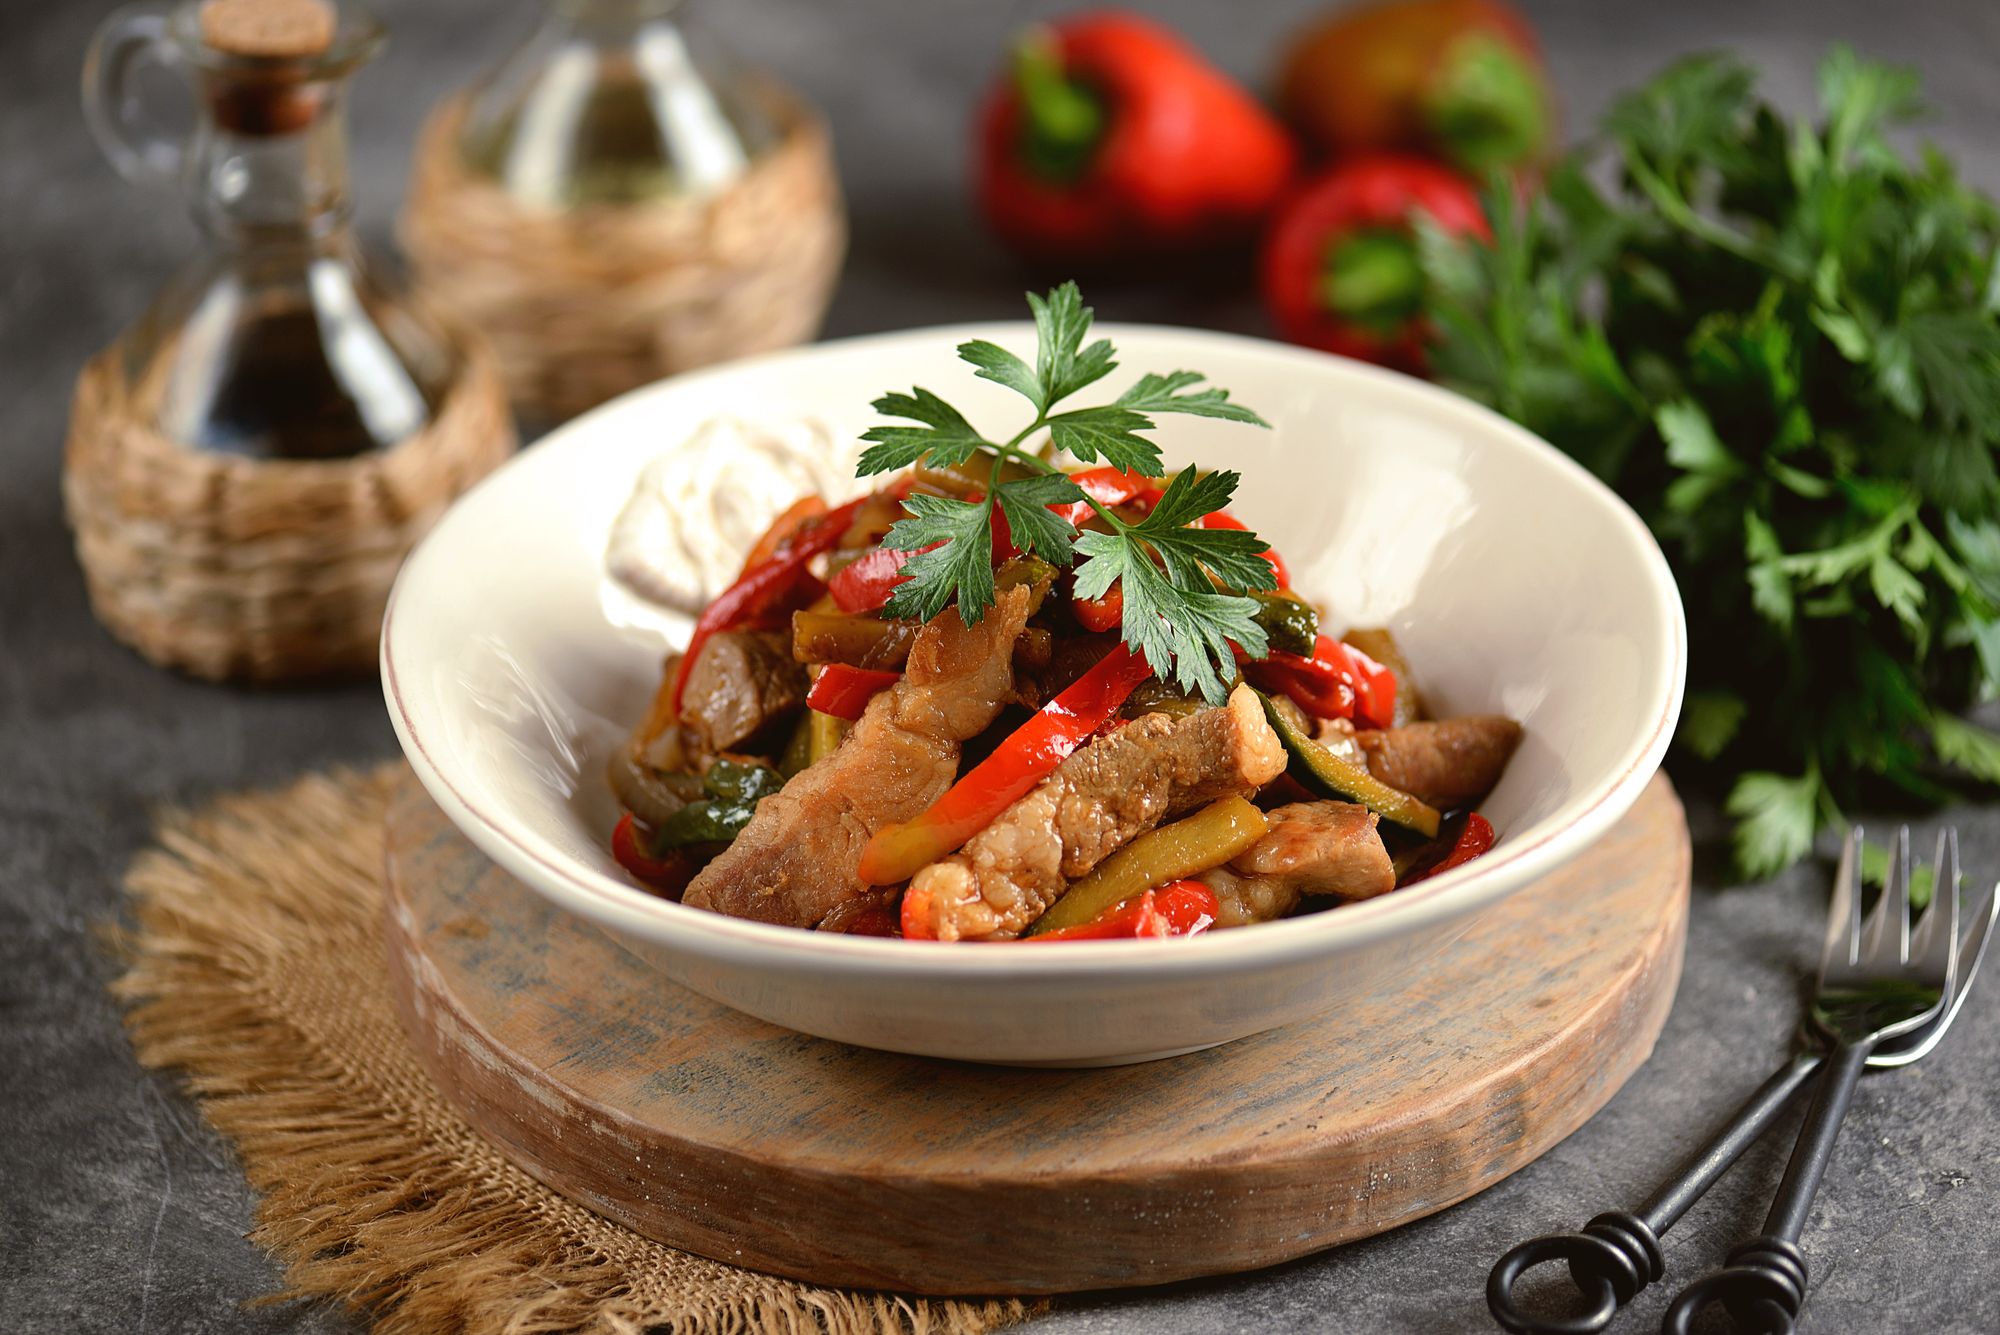 Pork Belly and Red Capsicum Casserole